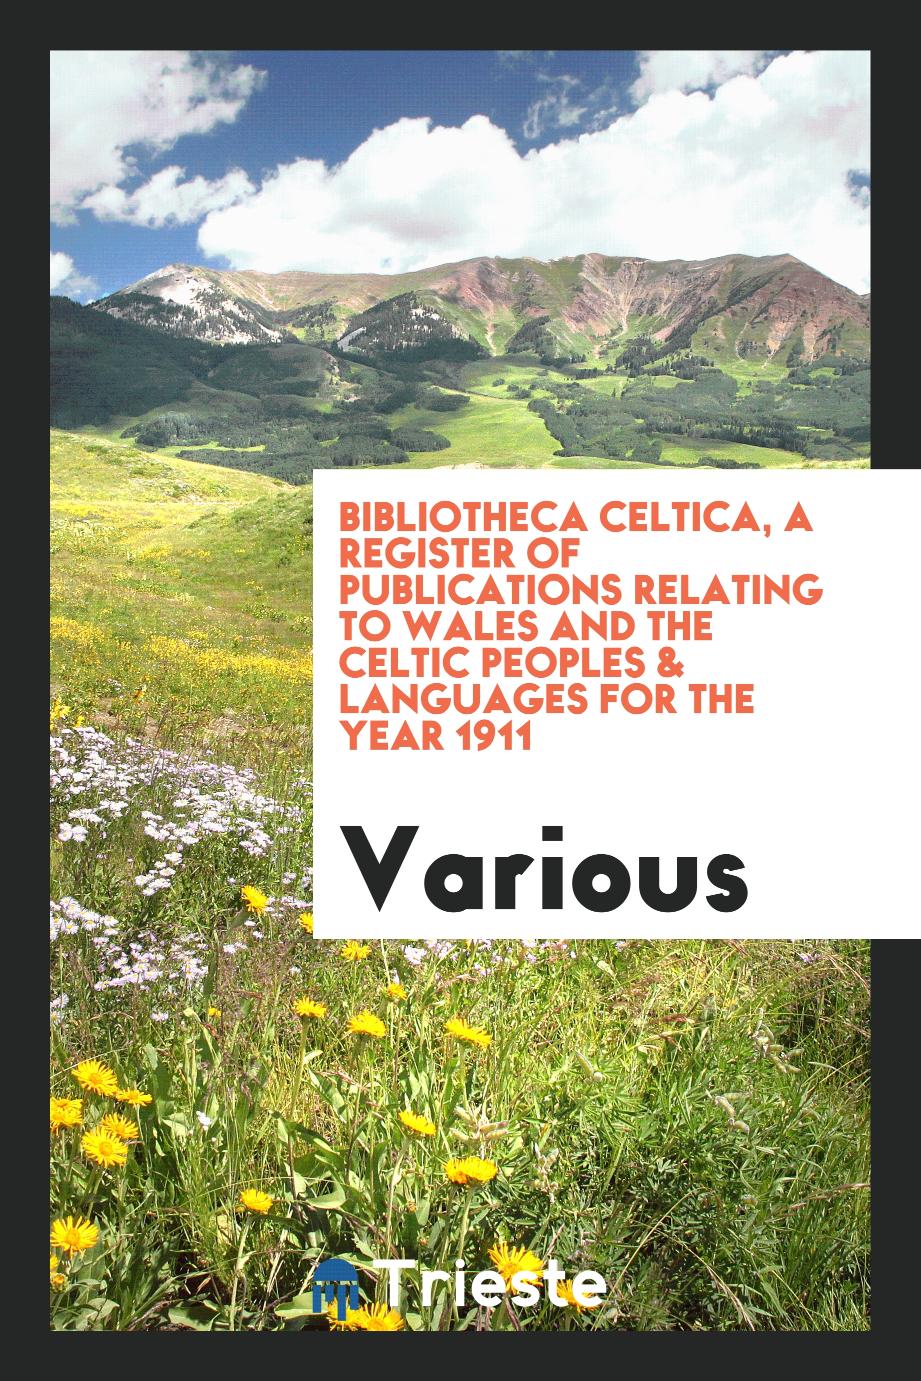 Bibliotheca celtica, a register of publications relating to wales and the celtic peoples & languages for the year 1911